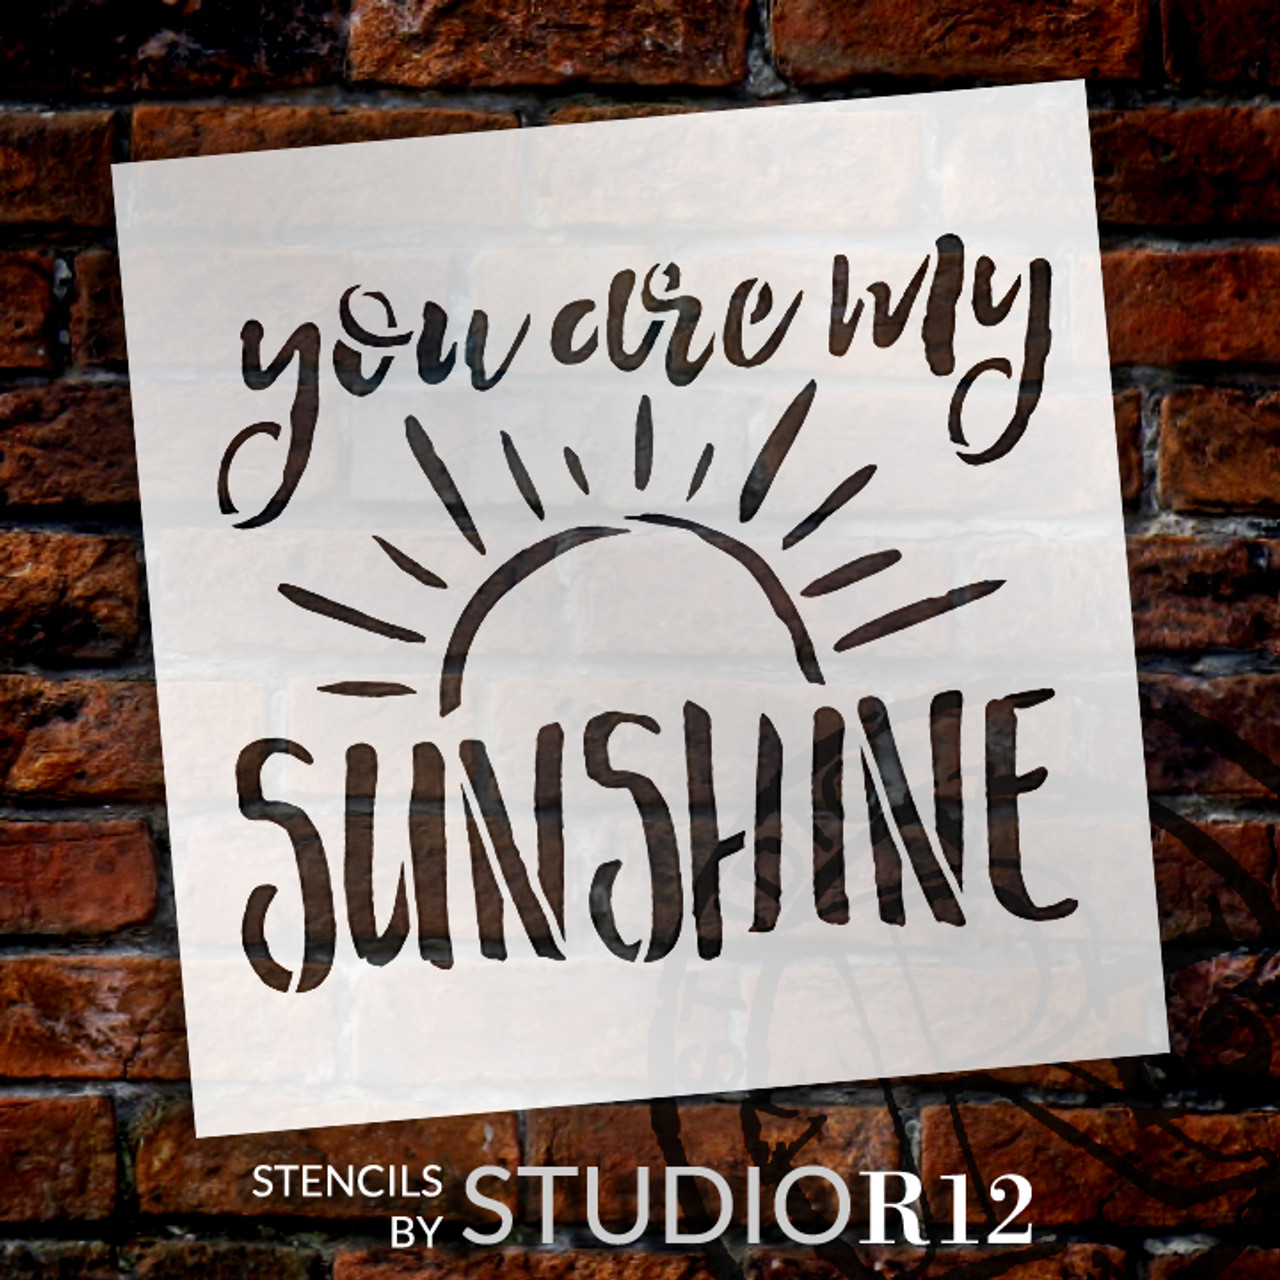 You Are My Sunshine Hand Brushed Word Stencil - 13.5" x 16" - STCL1513_5 - by StudioR12